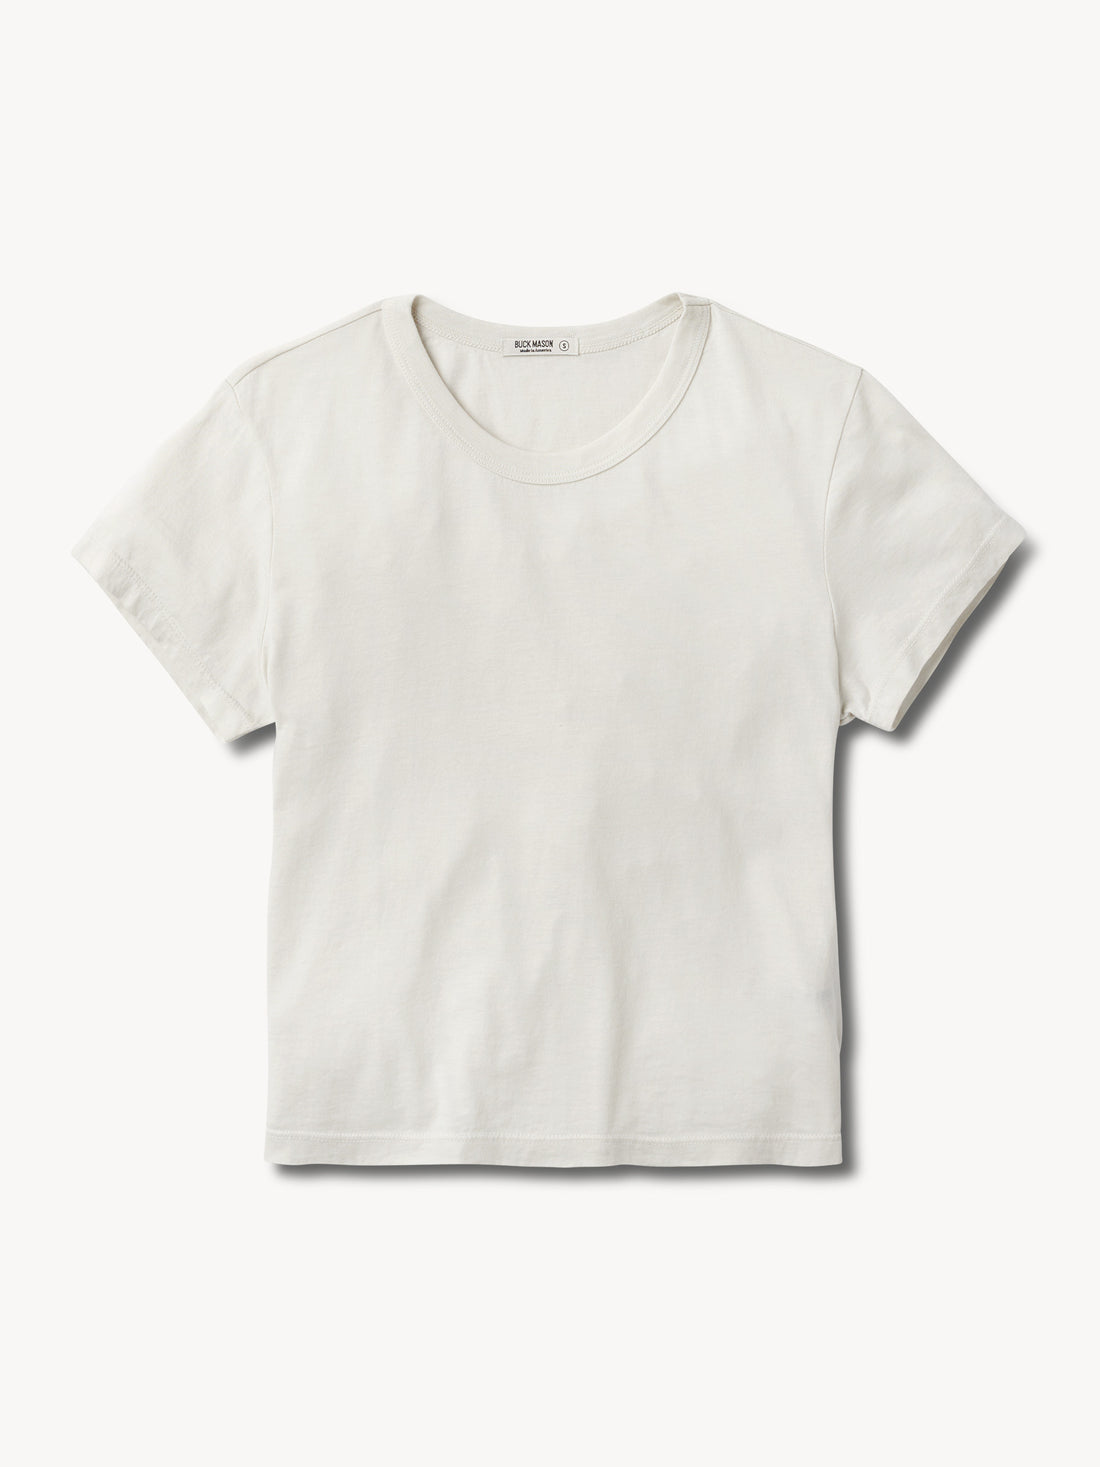 Shop the best white T-shirts for women by style, fit and budget